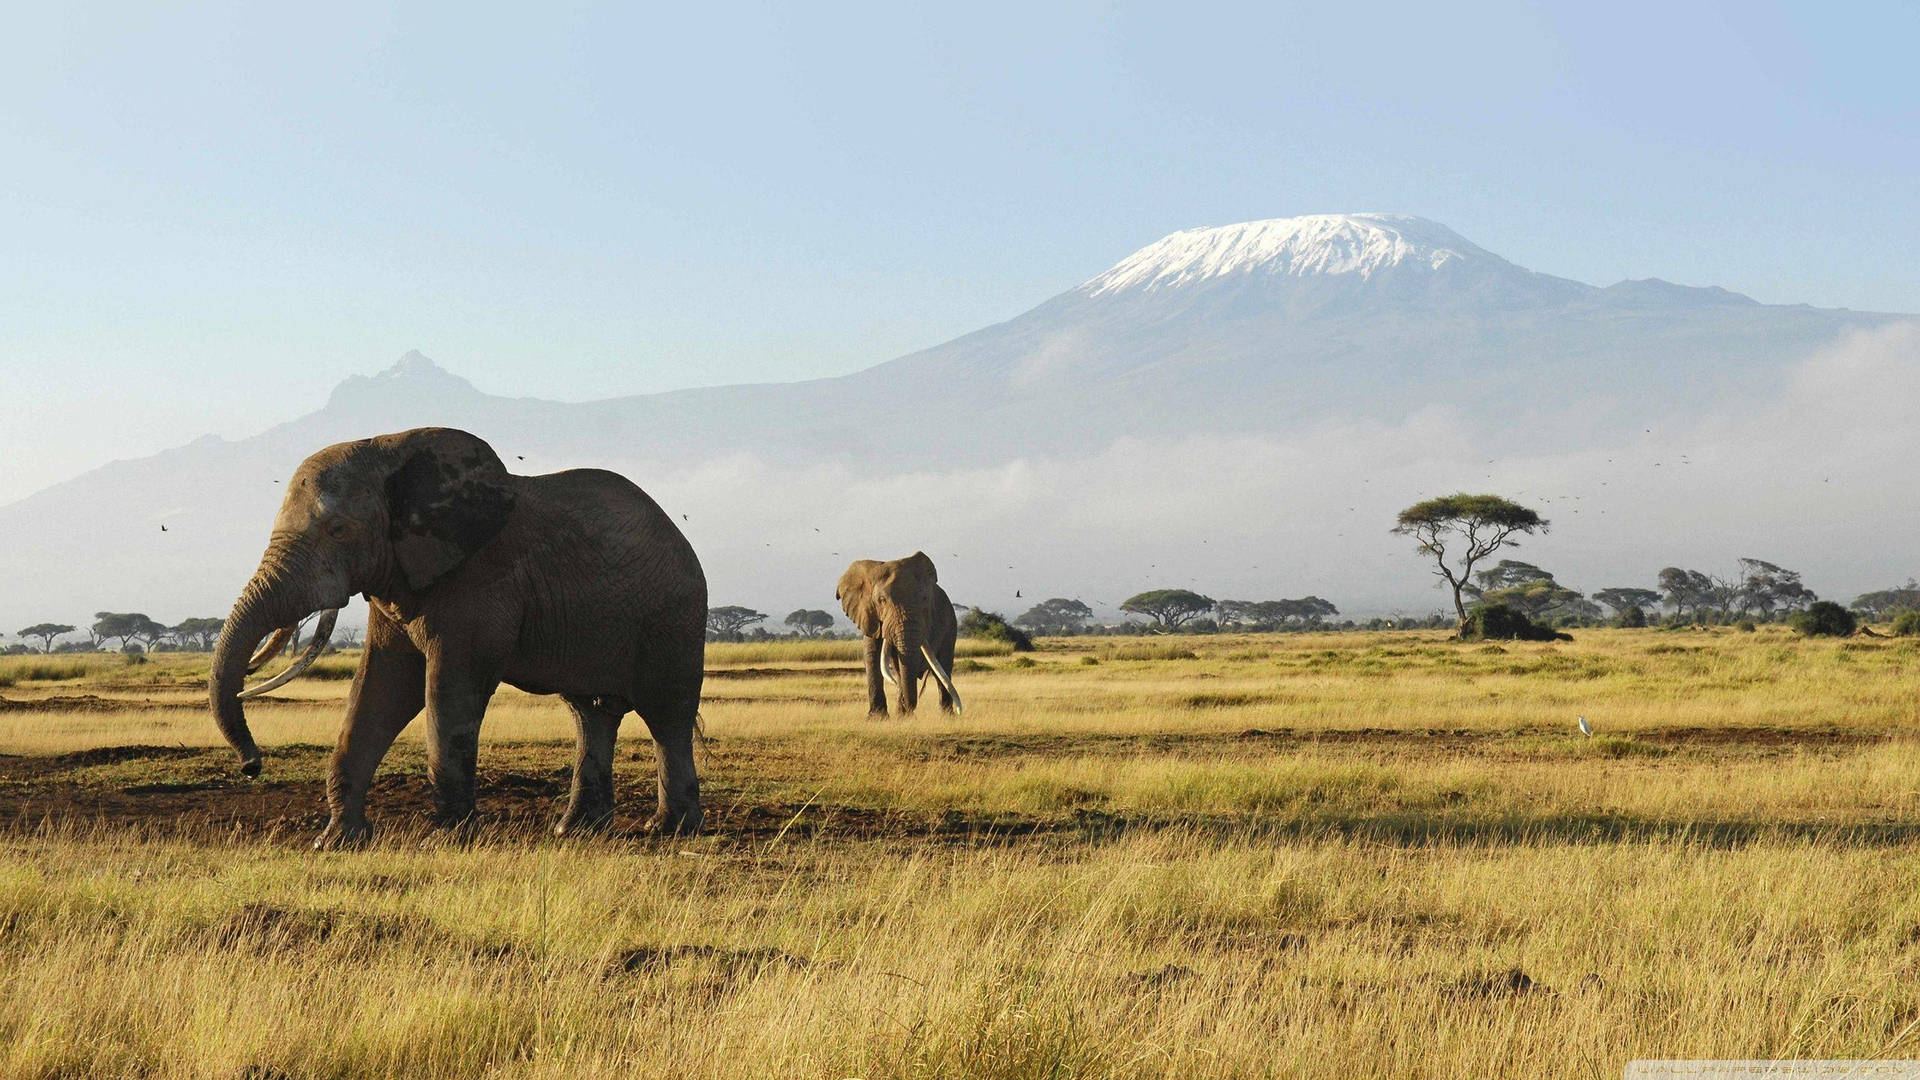 Elephant And Mountains In Africa